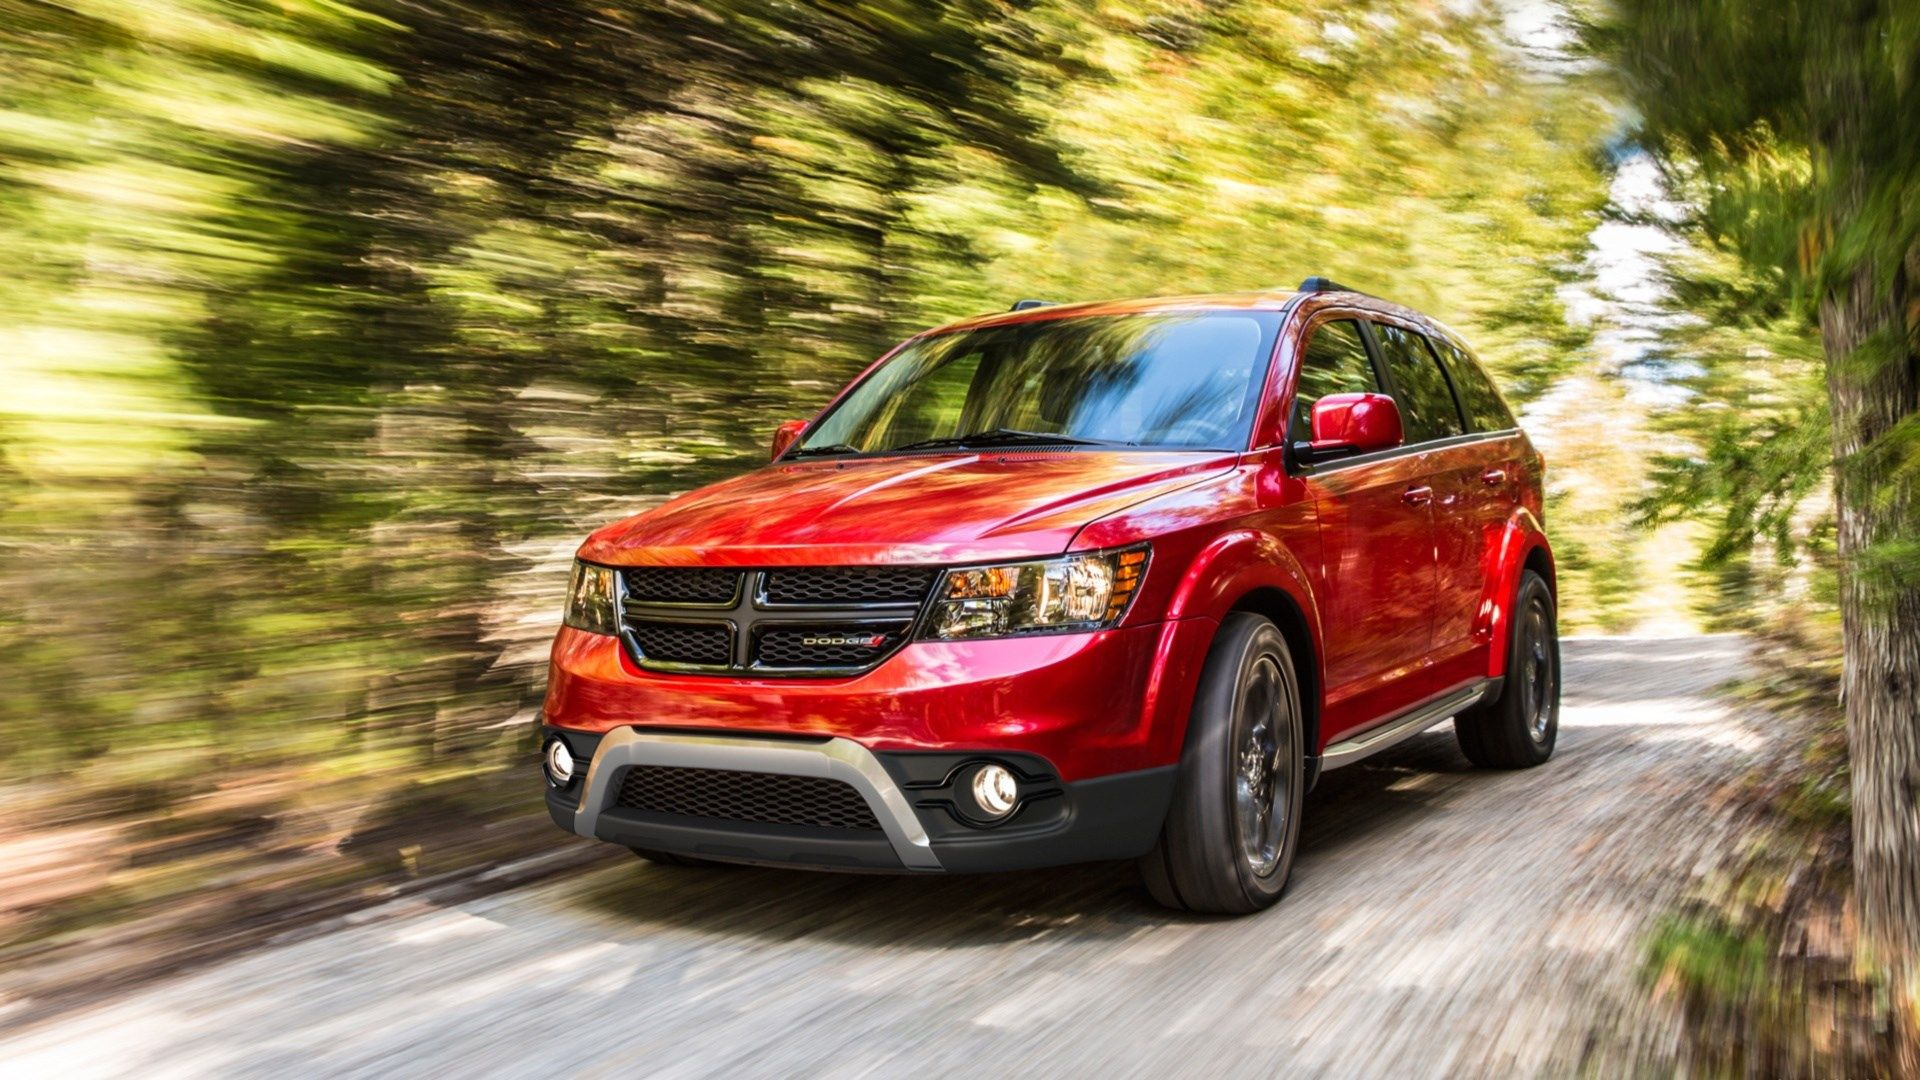 Red Dodge Journey on the road